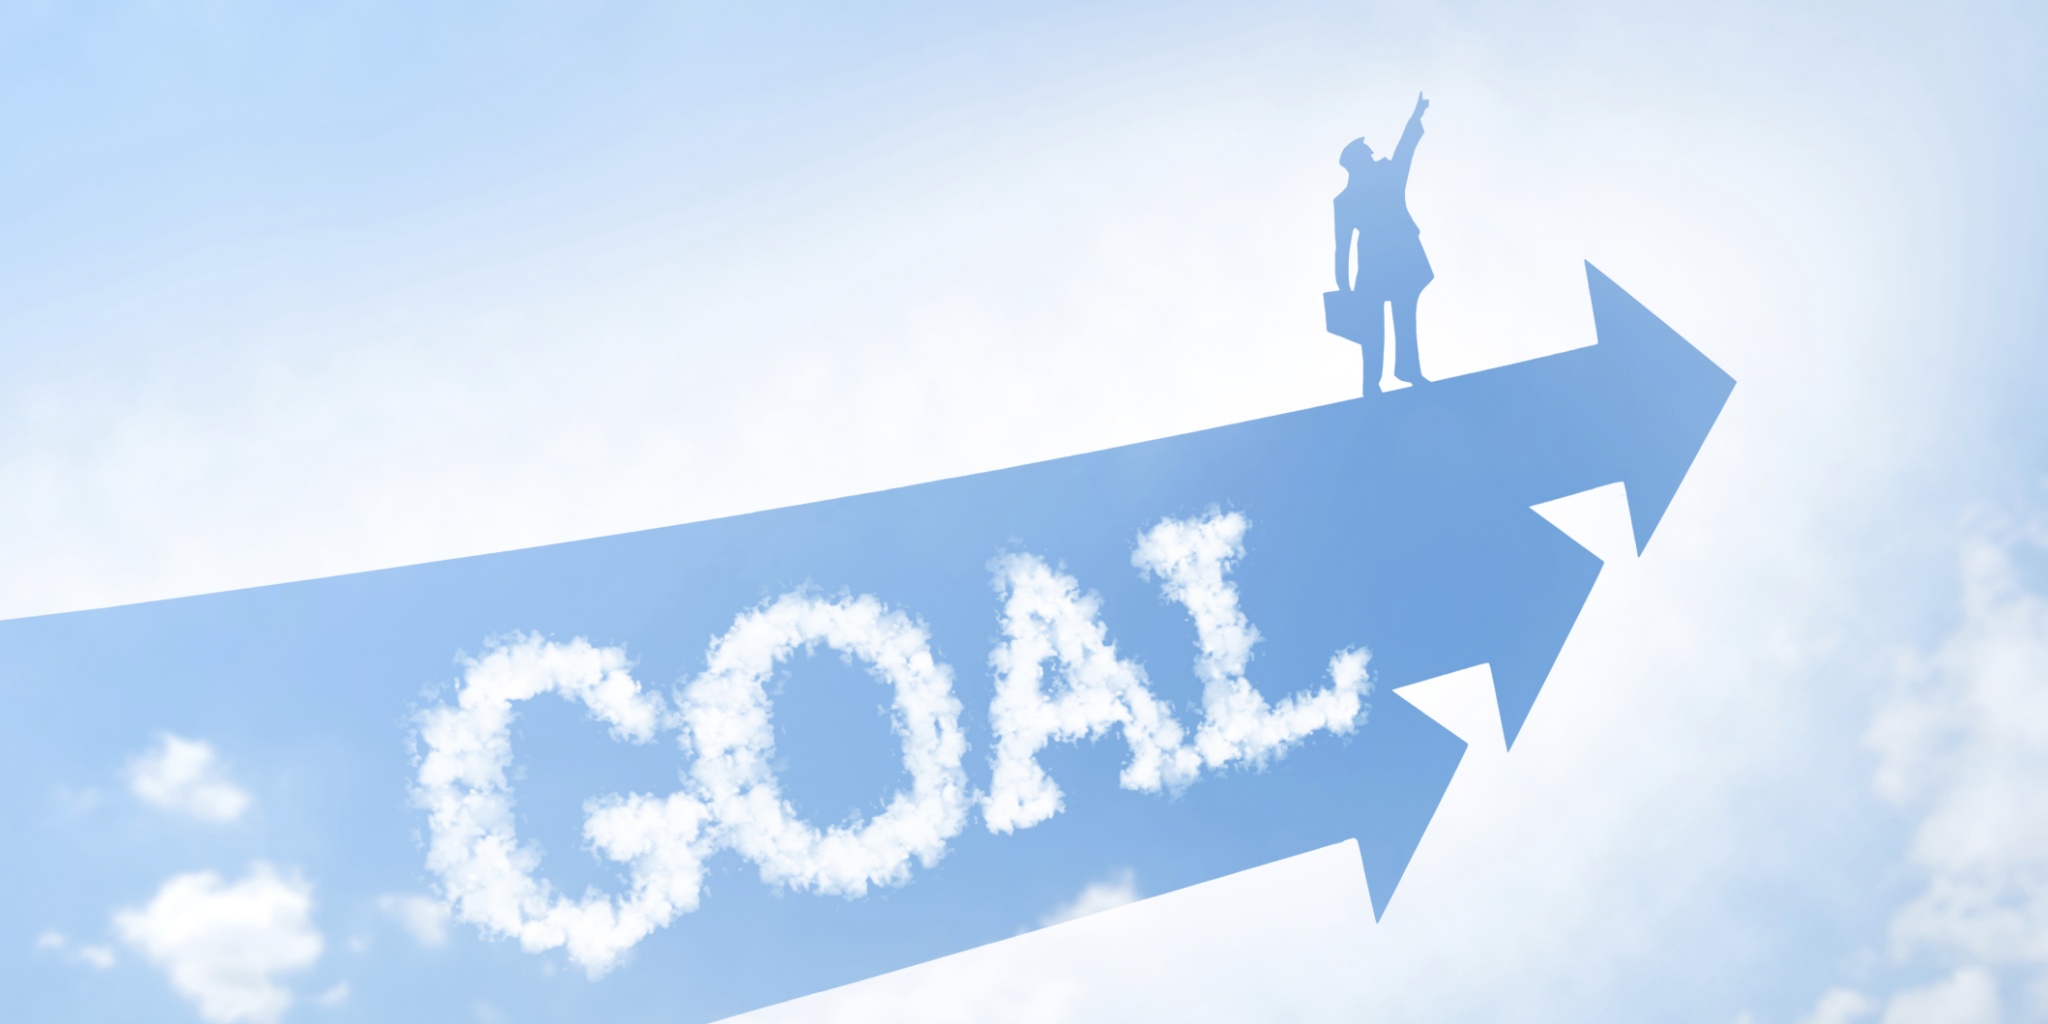 How to achieve your goals | Psychologies